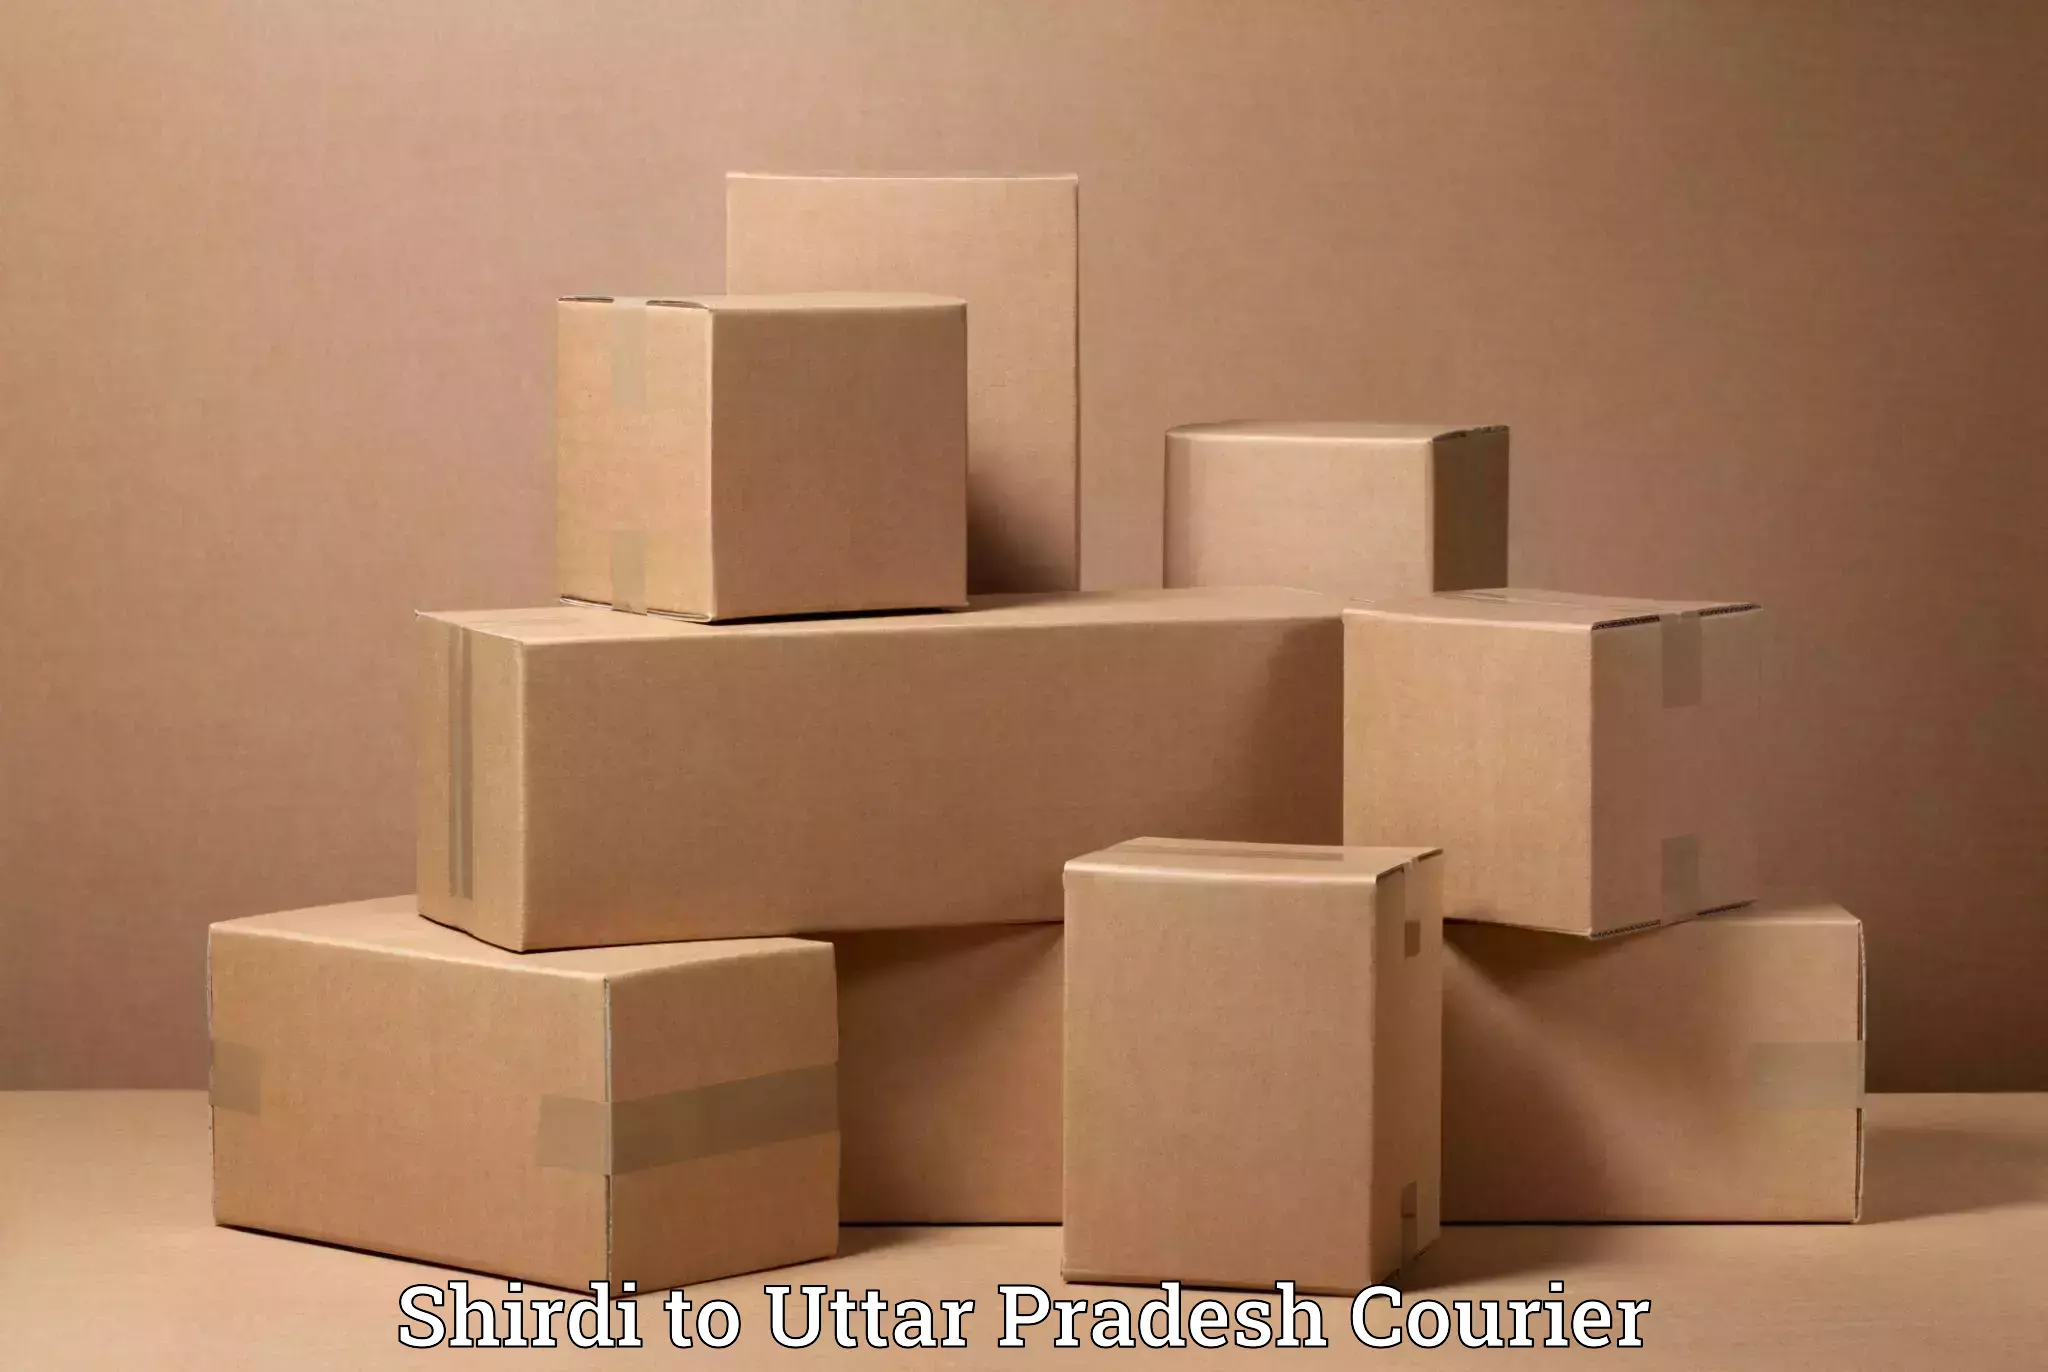 Furniture moving specialists Shirdi to Agra